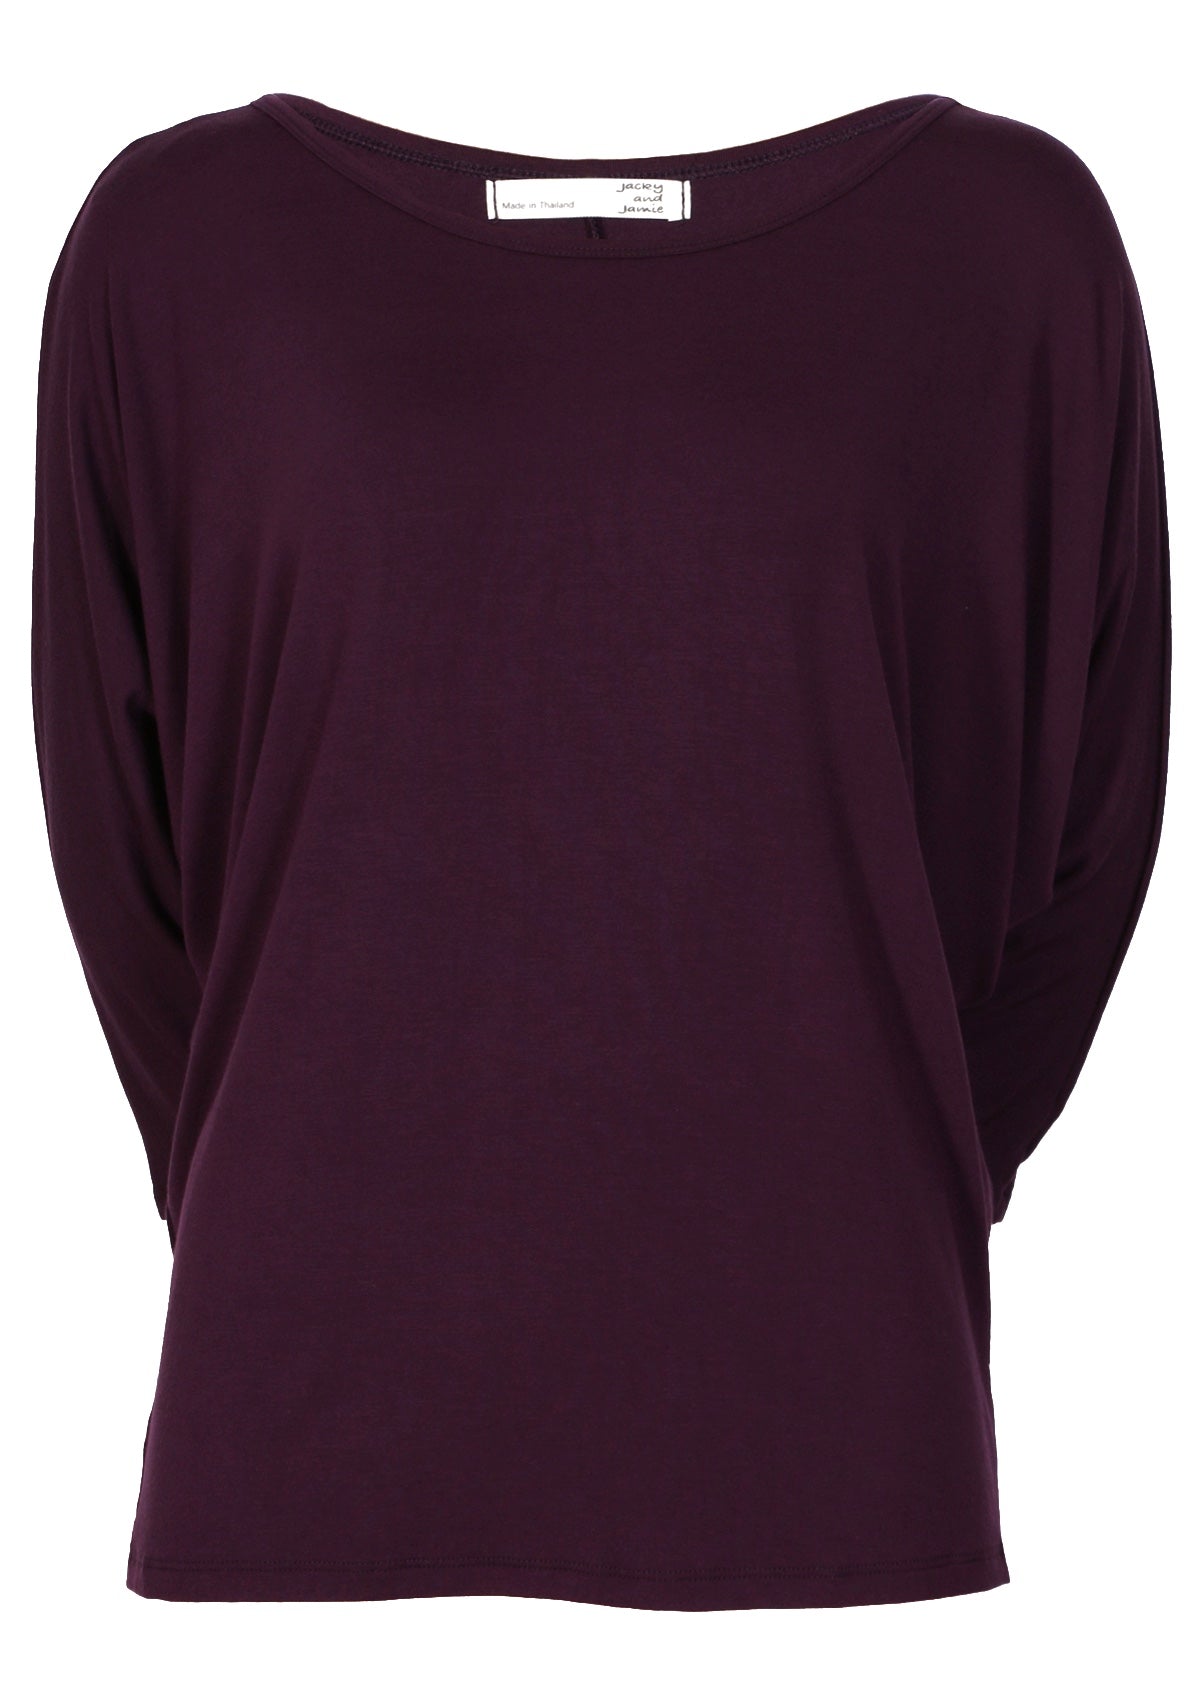 Front view of a 3/4 sleeve rayon batwing round neckline purple top.